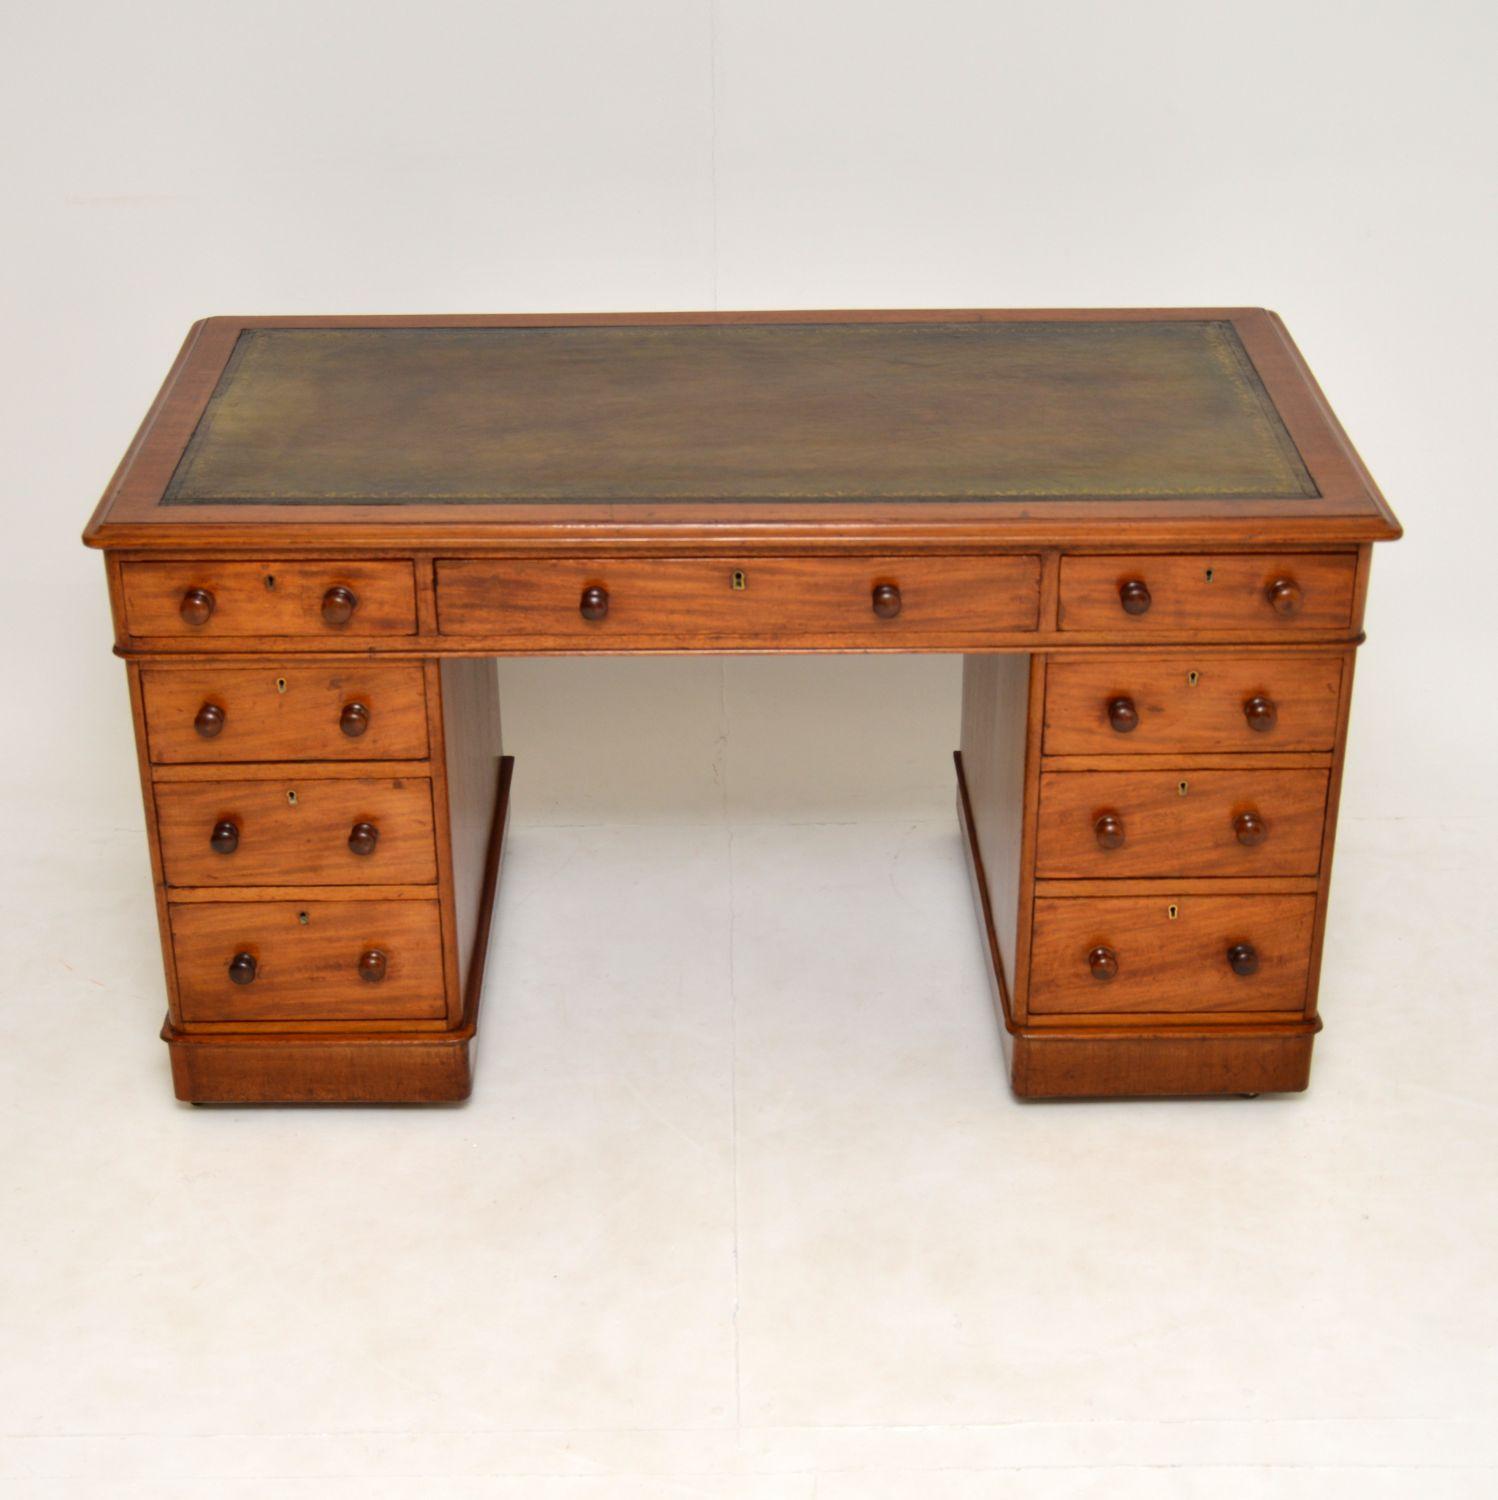 An excellent antique Victorian period pedestal desk in mahogany. This dates from around 1860-1880.

It is very well made, with an inset leather top, lovely turned handles and a plinth base on brass casters. The drawers which are graduated in